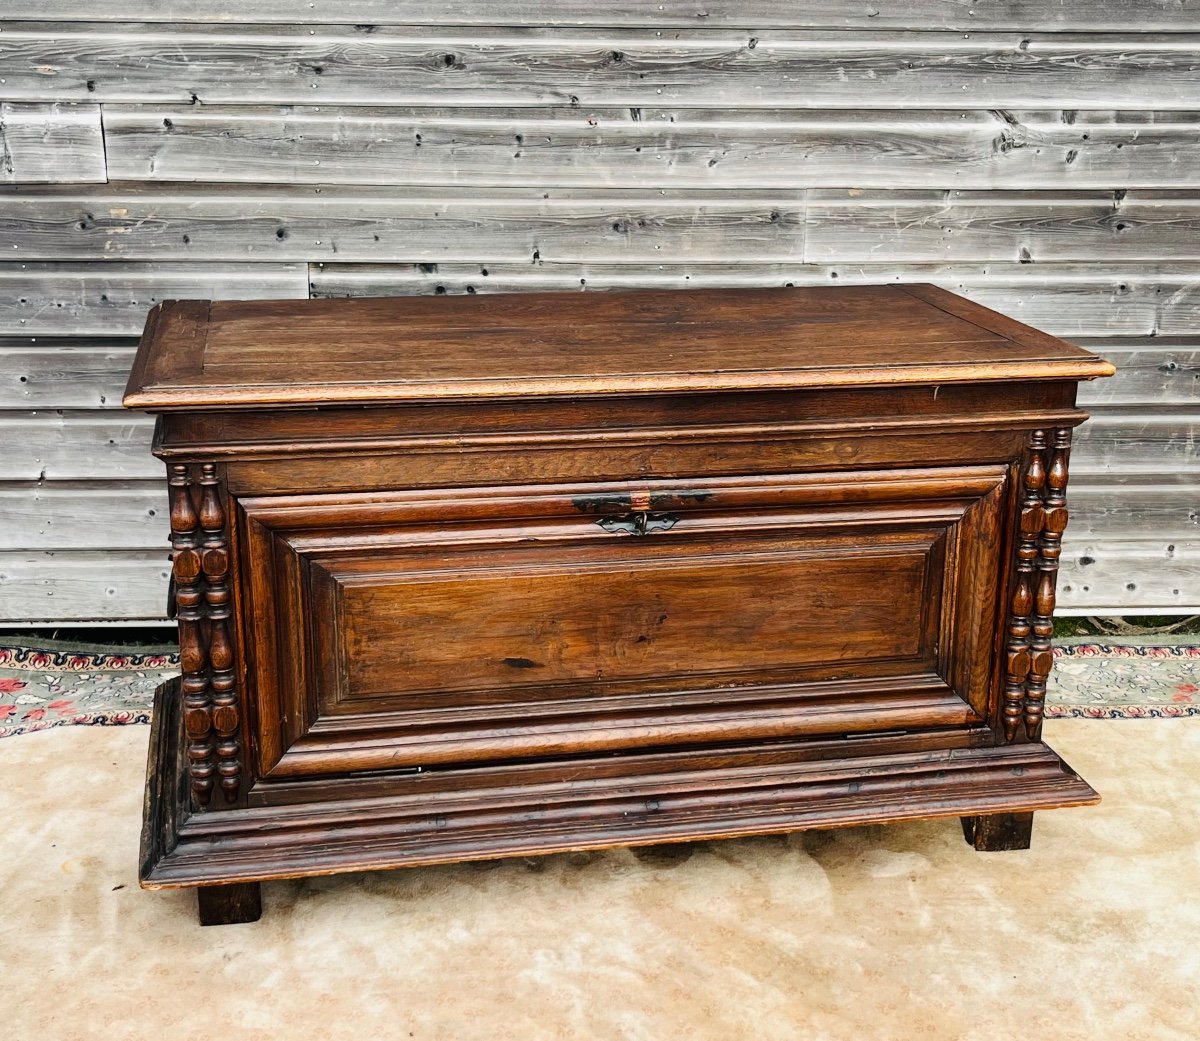 Large Oak Chest From The 18th Century